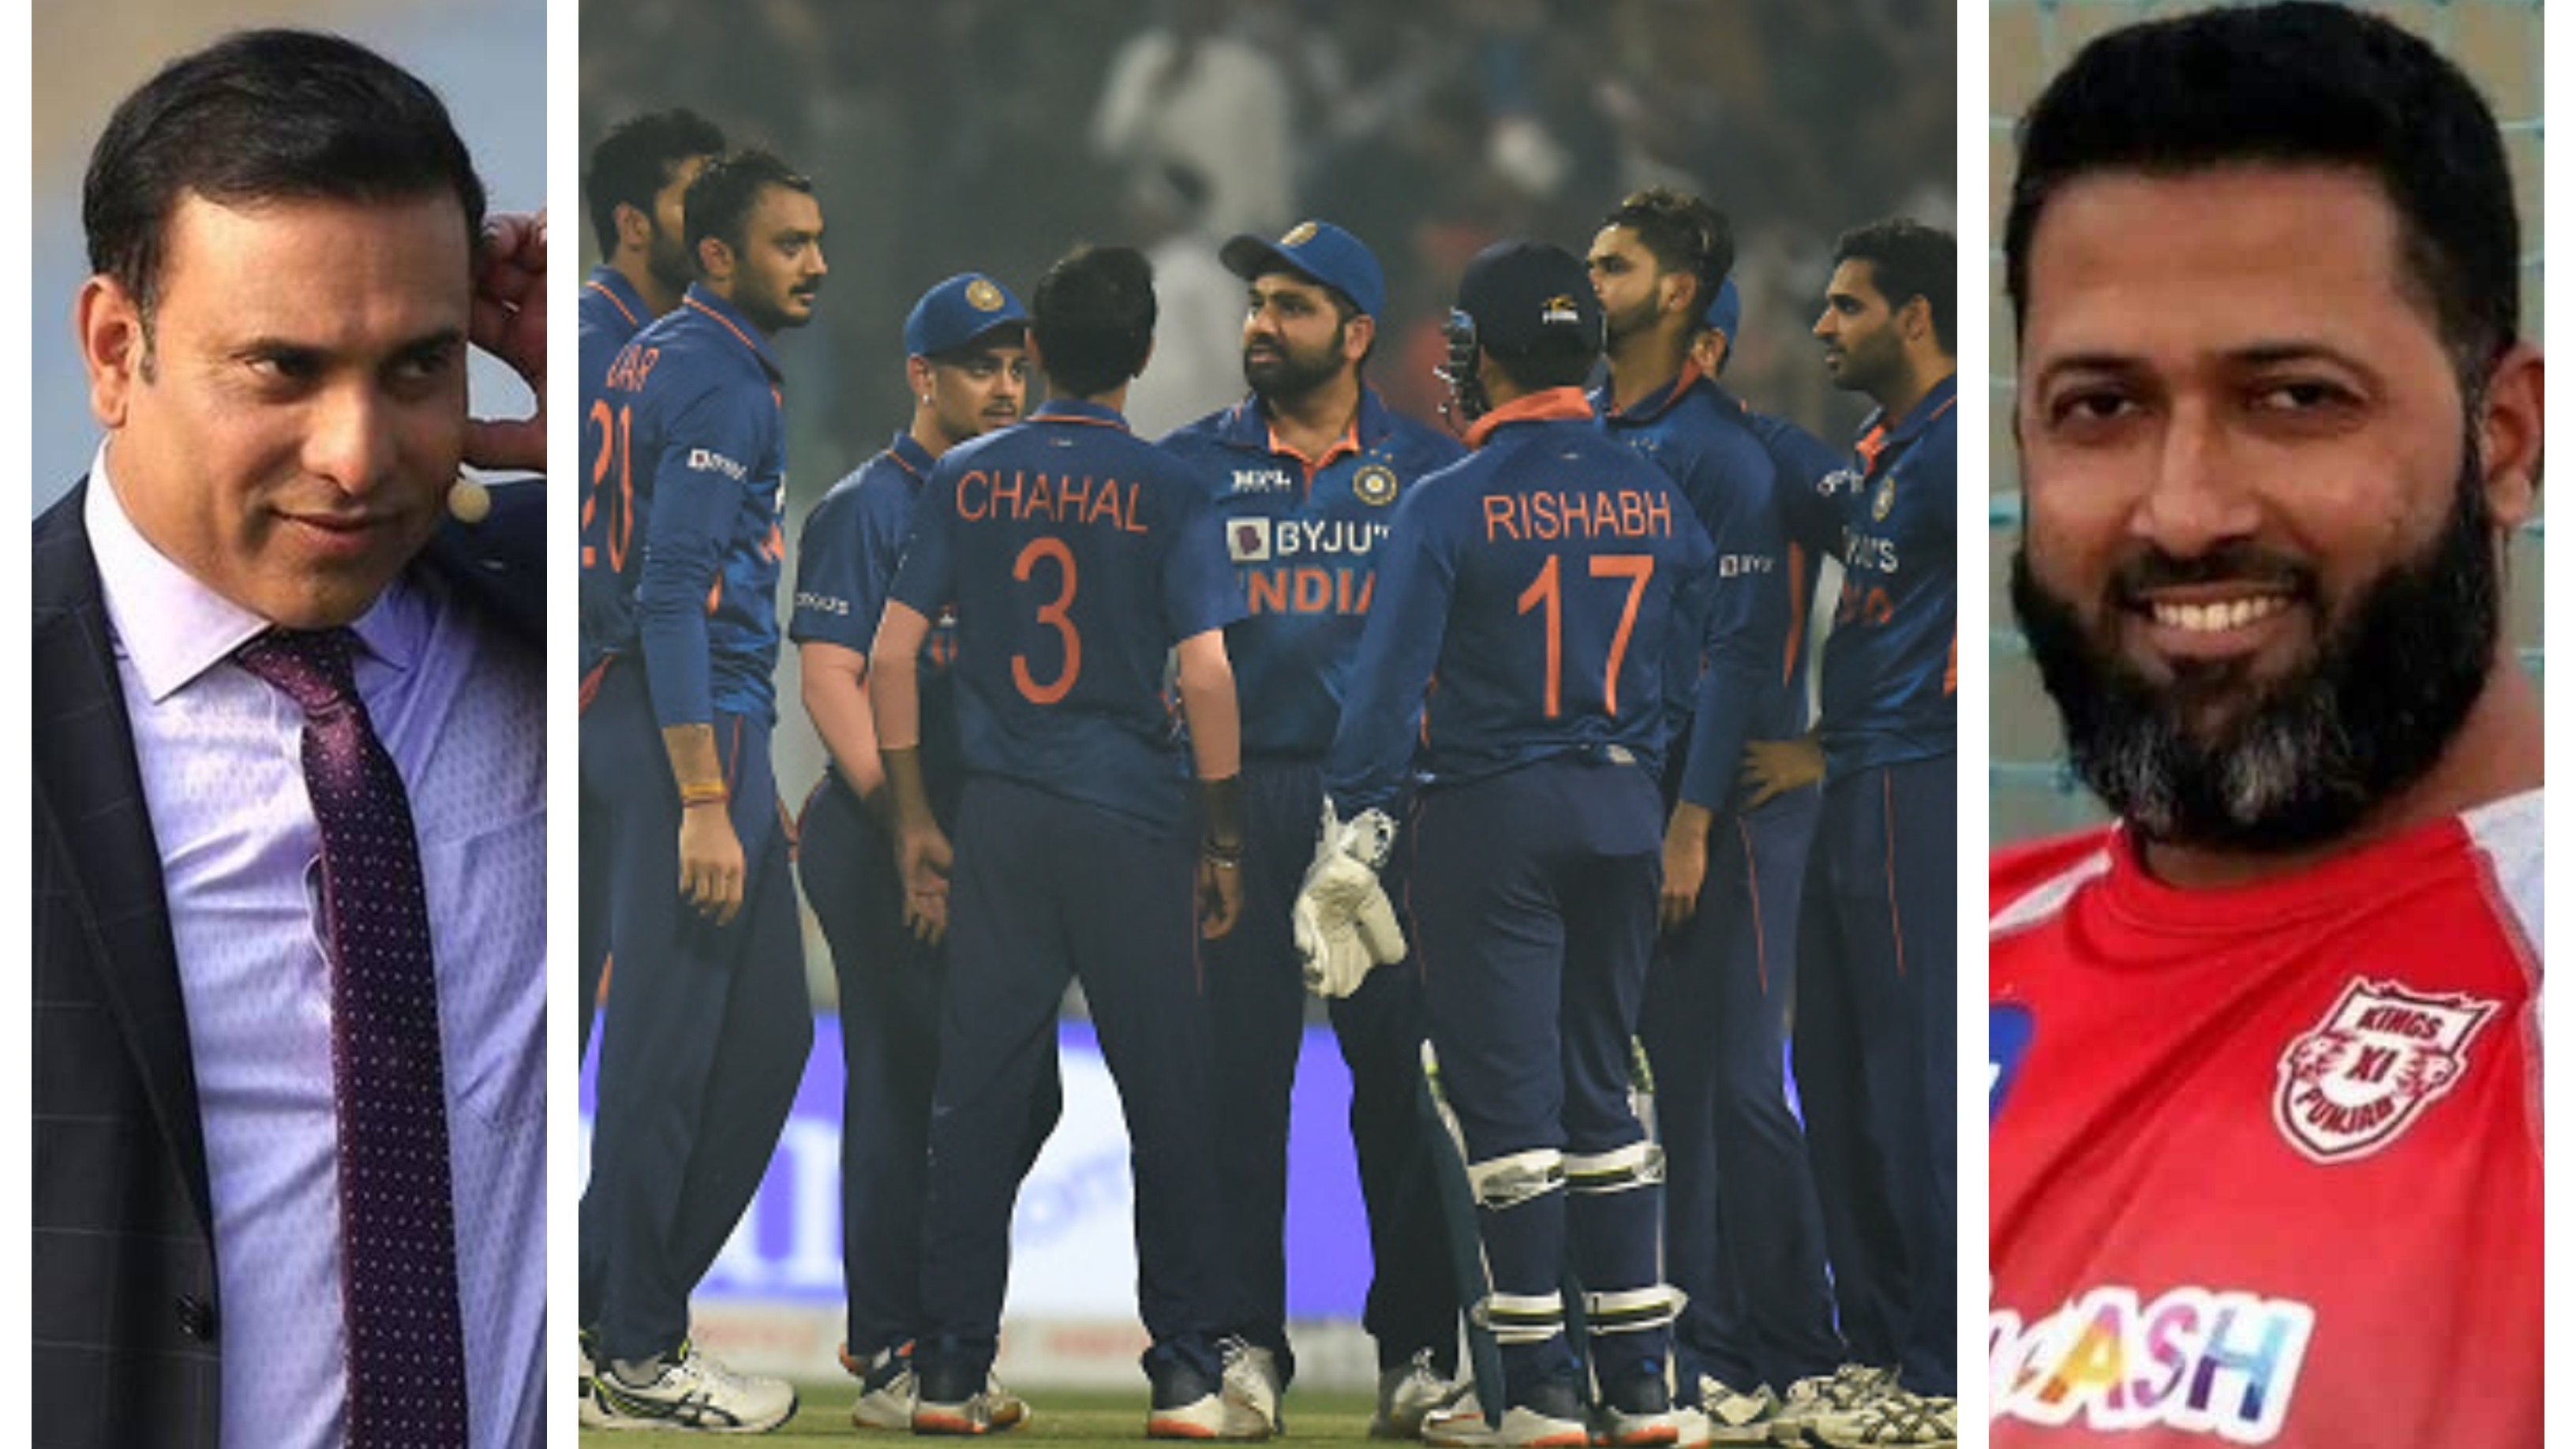 IND v NZ 2021: Cricket fraternity reacts as India complete 3-0 whitewash with a crushing win in final T20I